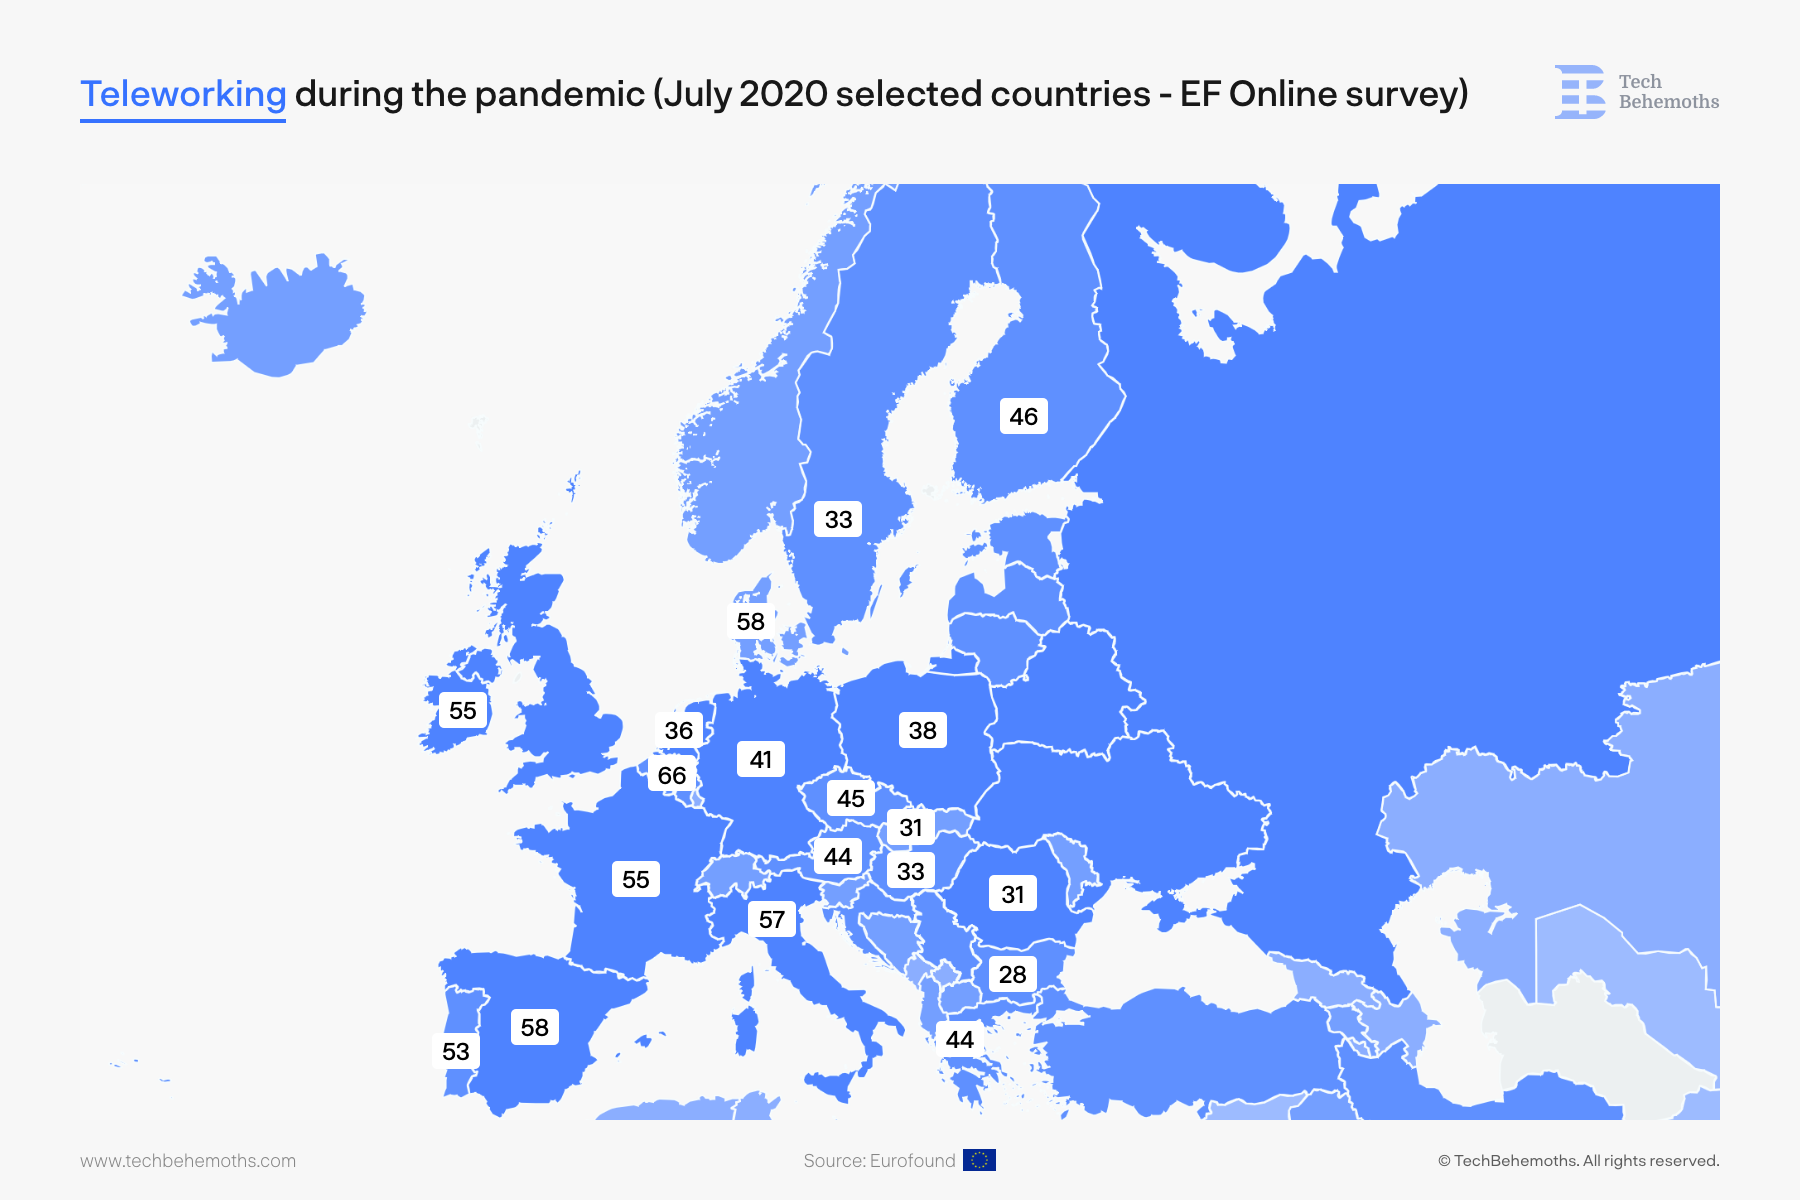 teleworking in europe dduring the pandemic